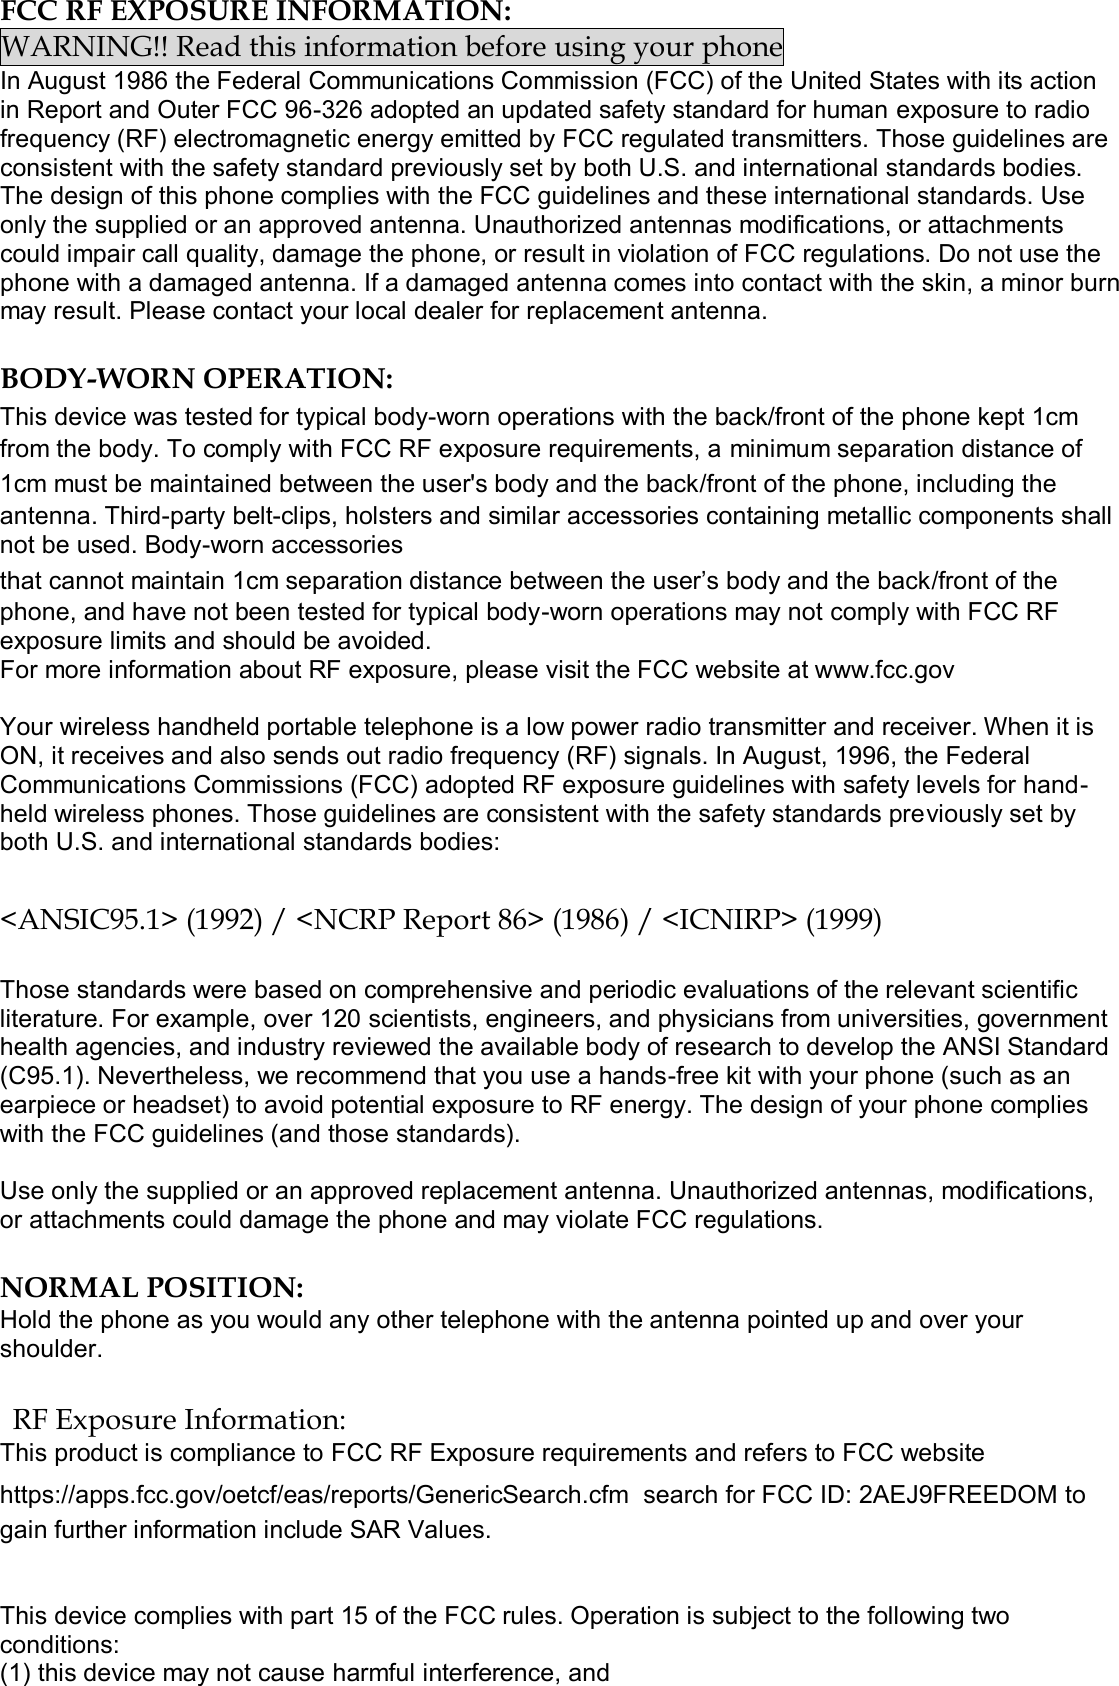  FCC RF EXPOSURE INFORMATION: WARNING!! Read this information before using your phone In August 1986 the Federal Communications Commission (FCC) of the United States with its action in Report and Outer FCC 96-326 adopted an updated safety standard for human exposure to radio frequency (RF) electromagnetic energy emitted by FCC regulated transmitters. Those guidelines are consistent with the safety standard previously set by both U.S. and international standards bodies. The design of this phone complies with the FCC guidelines and these international standards. Use only the supplied or an approved antenna. Unauthorized antennas modifications, or attachments could impair call quality, damage the phone, or result in violation of FCC regulations. Do not use the phone with a damaged antenna. If a damaged antenna comes into contact with the skin, a minor burn may result. Please contact your local dealer for replacement antenna.  BODY-WORN OPERATION: This device was tested for typical body-worn operations with the back/front of the phone kept 1cm from the body. To comply with FCC RF exposure requirements, a minimum separation distance of 1cm must be maintained between the user&apos;s body and the back/front of the phone, including the antenna. Third-party belt-clips, holsters and similar accessories containing metallic components shall not be used. Body-worn accessories that cannot maintain 1cm separation distance between the user’s body and the back/front of the phone, and have not been tested for typical body-worn operations may not comply with FCC RF exposure limits and should be avoided. For more information about RF exposure, please visit the FCC website at www.fcc.gov  Your wireless handheld portable telephone is a low power radio transmitter and receiver. When it is ON, it receives and also sends out radio frequency (RF) signals. In August, 1996, the Federal Communications Commissions (FCC) adopted RF exposure guidelines with safety levels for hand-held wireless phones. Those guidelines are consistent with the safety standards previously set by both U.S. and international standards bodies:  &lt;ANSIC95.1&gt; (1992) / &lt;NCRP Report 86&gt; (1986) / &lt;ICNIRP&gt; (1999)  Those standards were based on comprehensive and periodic evaluations of the relevant scientific literature. For example, over 120 scientists, engineers, and physicians from universities, government health agencies, and industry reviewed the available body of research to develop the ANSI Standard (C95.1). Nevertheless, we recommend that you use a hands-free kit with your phone (such as an earpiece or headset) to avoid potential exposure to RF energy. The design of your phone complies with the FCC guidelines (and those standards).  Use only the supplied or an approved replacement antenna. Unauthorized antennas, modifications, or attachments could damage the phone and may violate FCC regulations.   NORMAL POSITION:  Hold the phone as you would any other telephone with the antenna pointed up and over your shoulder.  RF Exposure Information: This product is compliance to FCC RF Exposure requirements and refers to FCC website https://apps.fcc.gov/oetcf/eas/reports/GenericSearch.cfm  search for FCC ID: 2AEJ9FREEDOM to gain further information include SAR Values.    This device complies with part 15 of the FCC rules. Operation is subject to the following two conditions: (1) this device may not cause harmful interference, and 